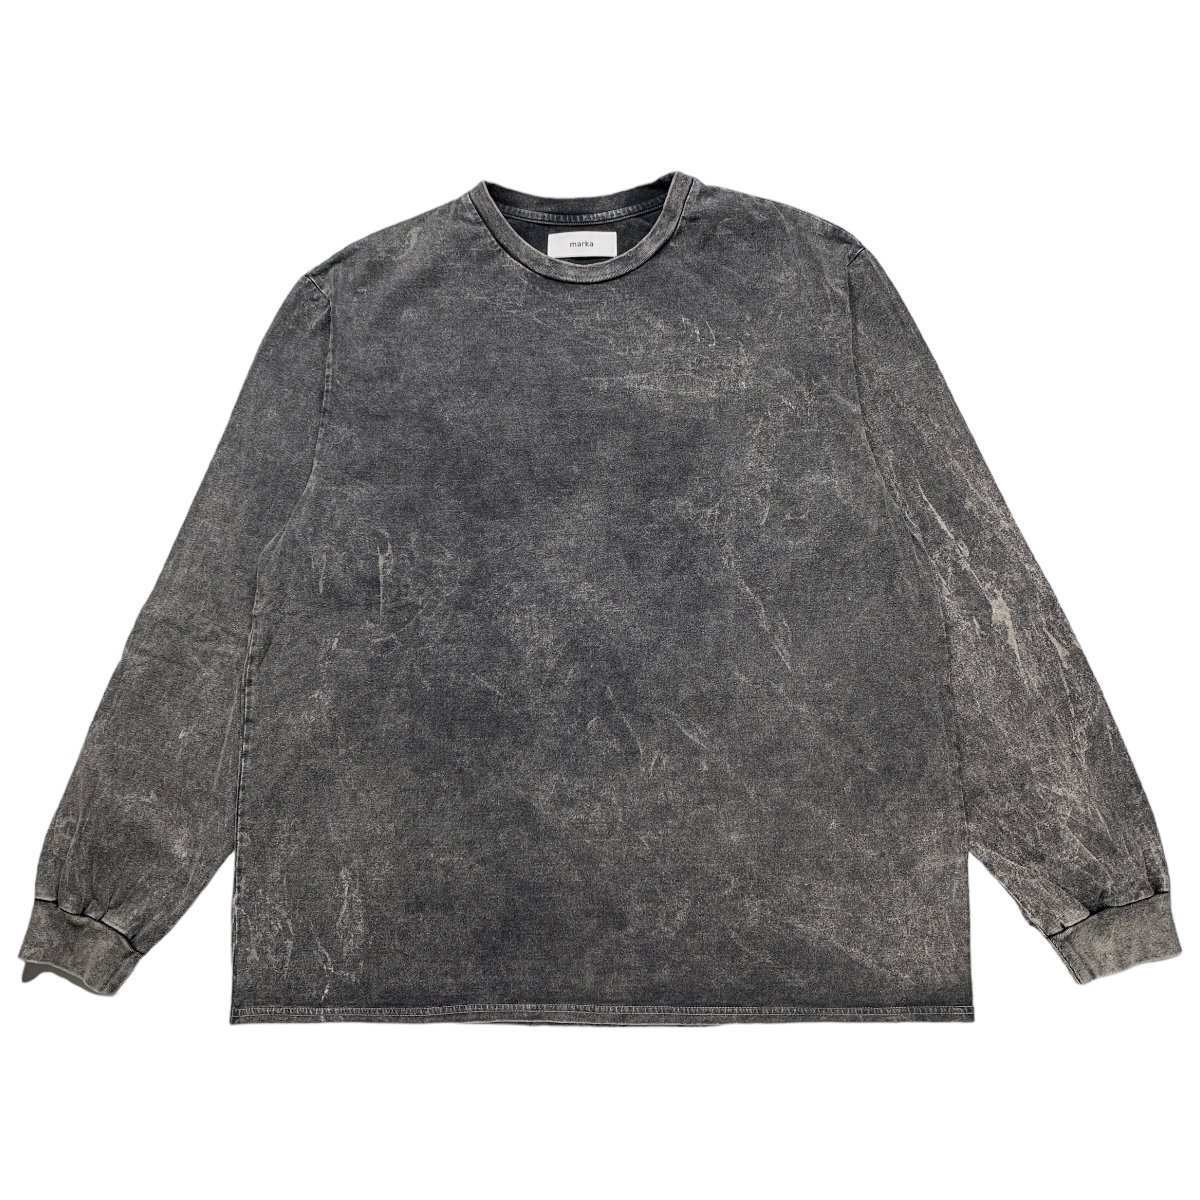 marka <BR>CREW NECK TEE L/S - 40/2 ORGANIC COTTON KNIT - (BLEACHED)